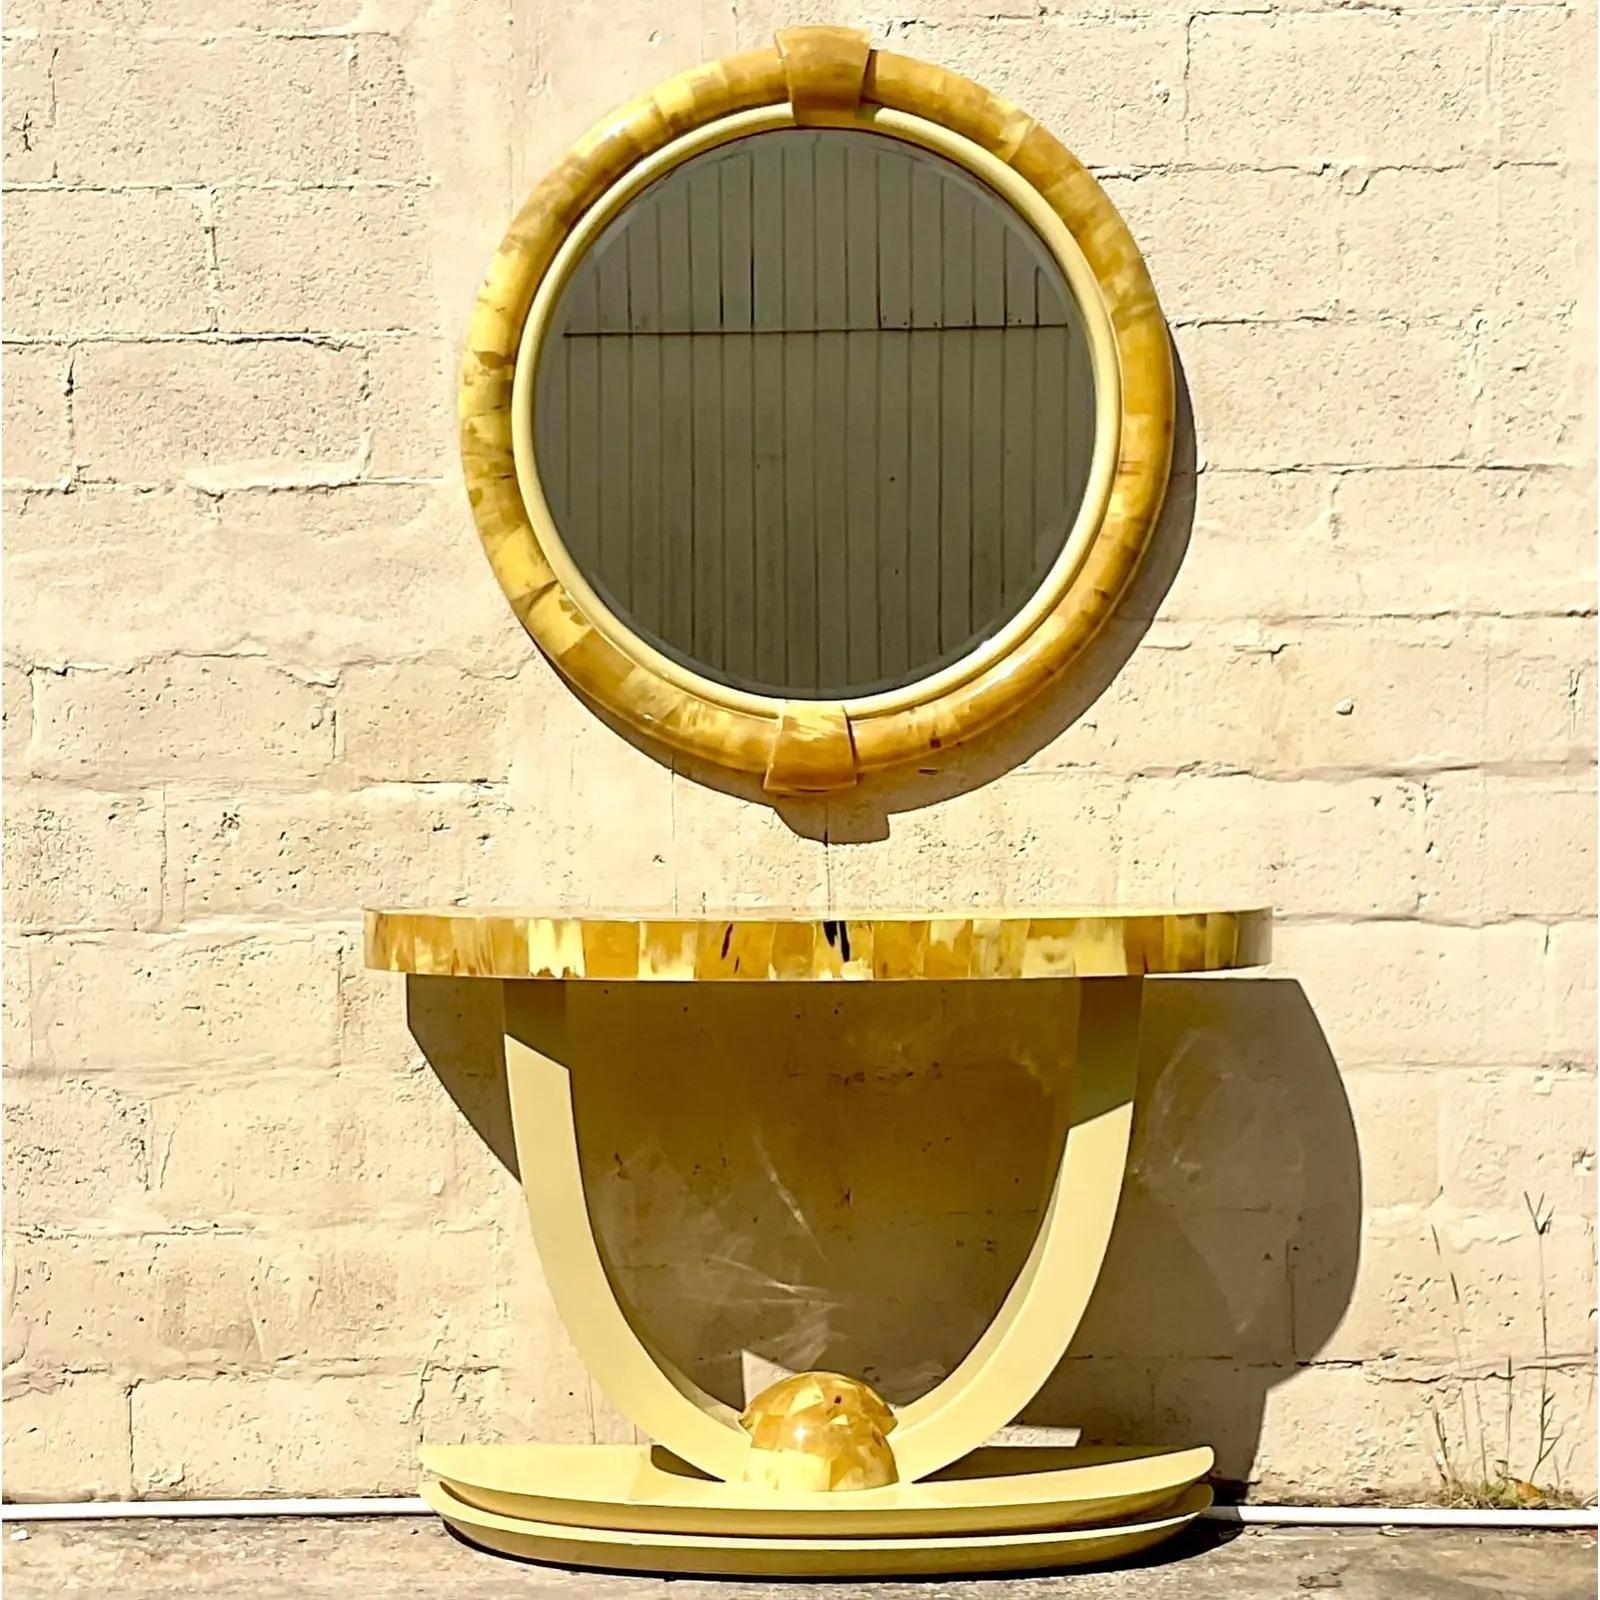 An extraordinary vintage console table set. A chic tessellated horn with a demilune console and coordinating mirror. Done in the manner of Enrique Garcel. Beautiful patina from time. Two sets available if your project needs a pair. 

Mirror